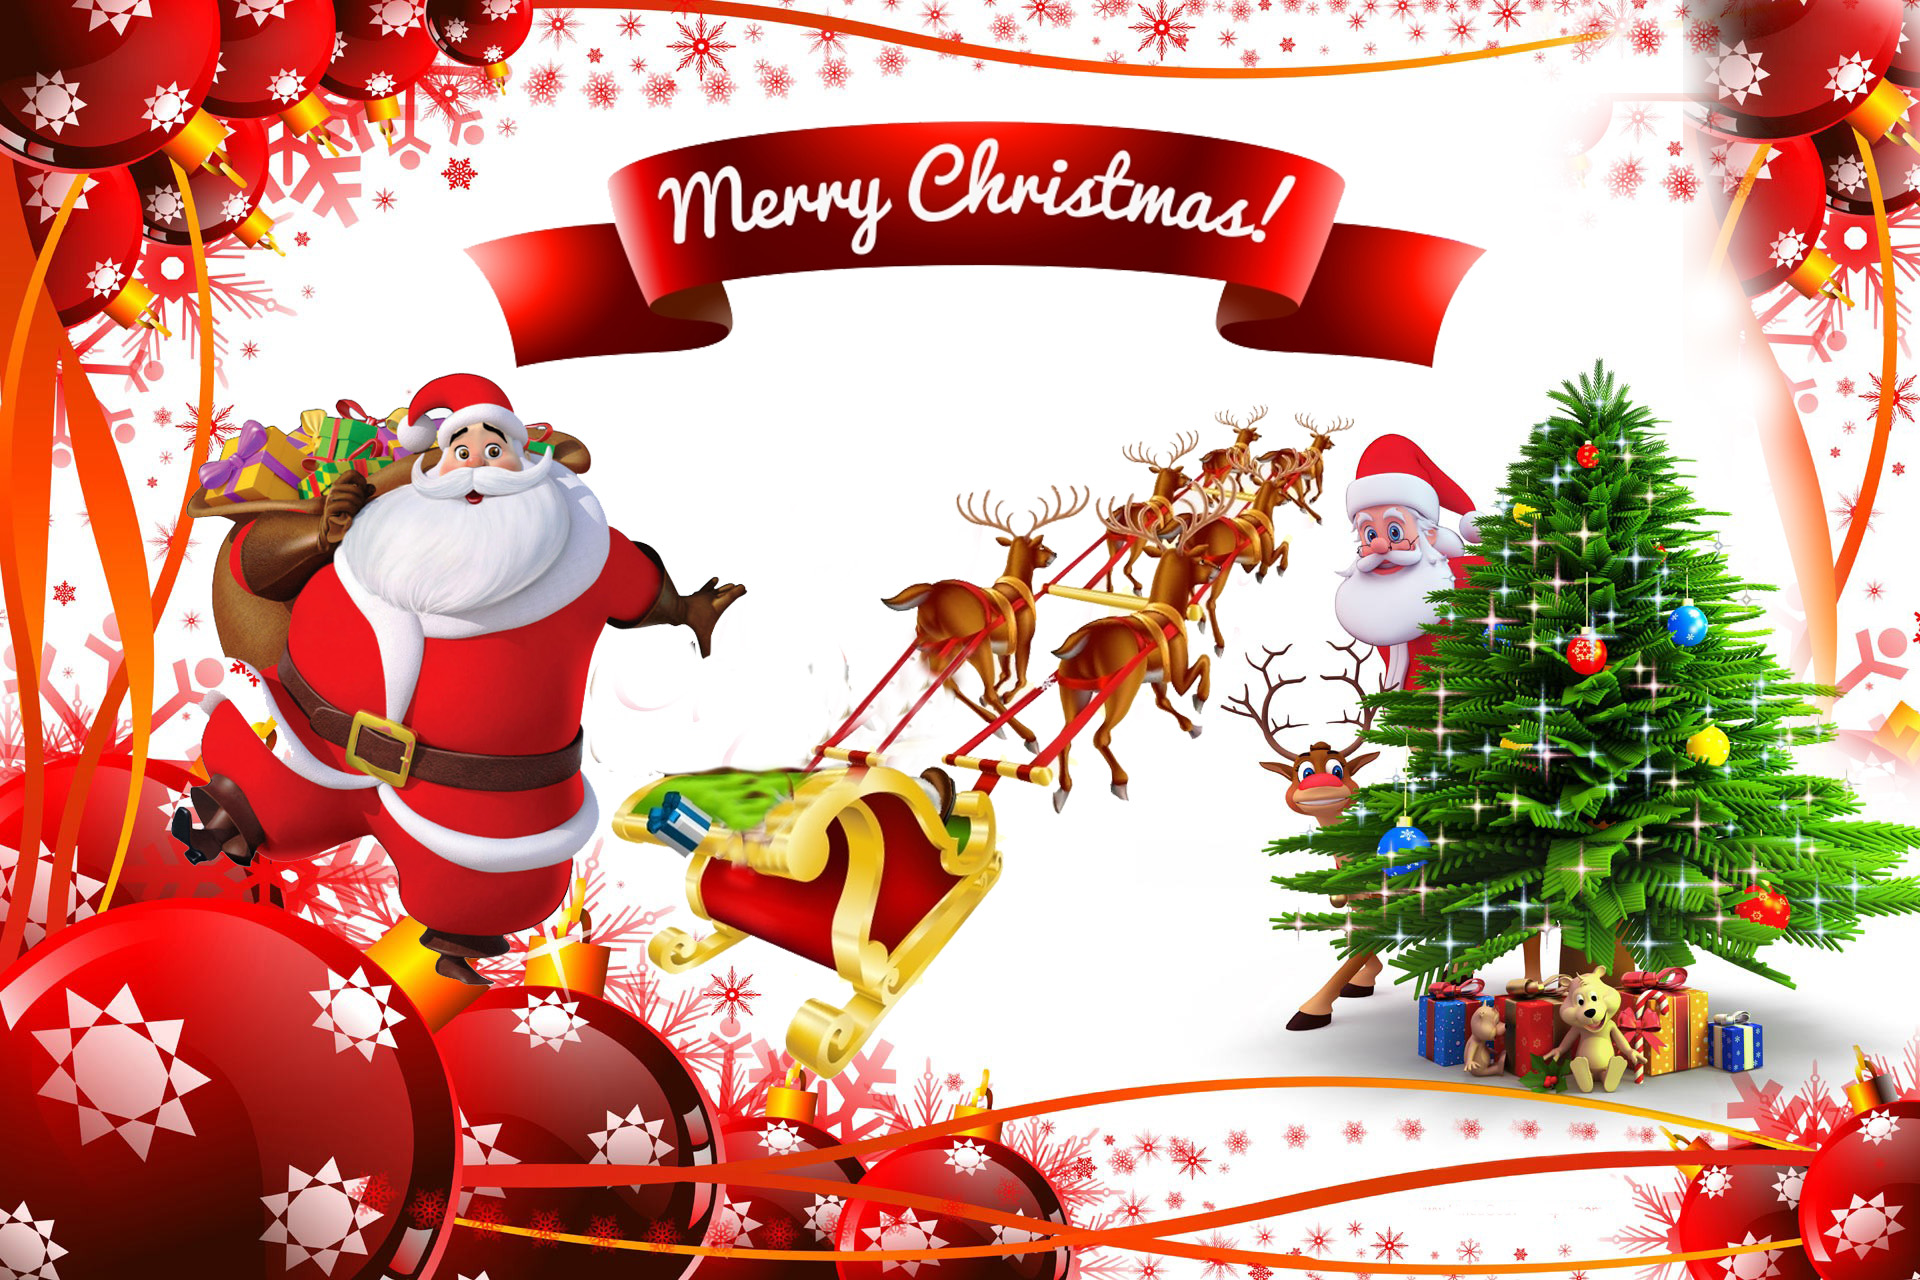 Importance Of Merry Christmas Day Image